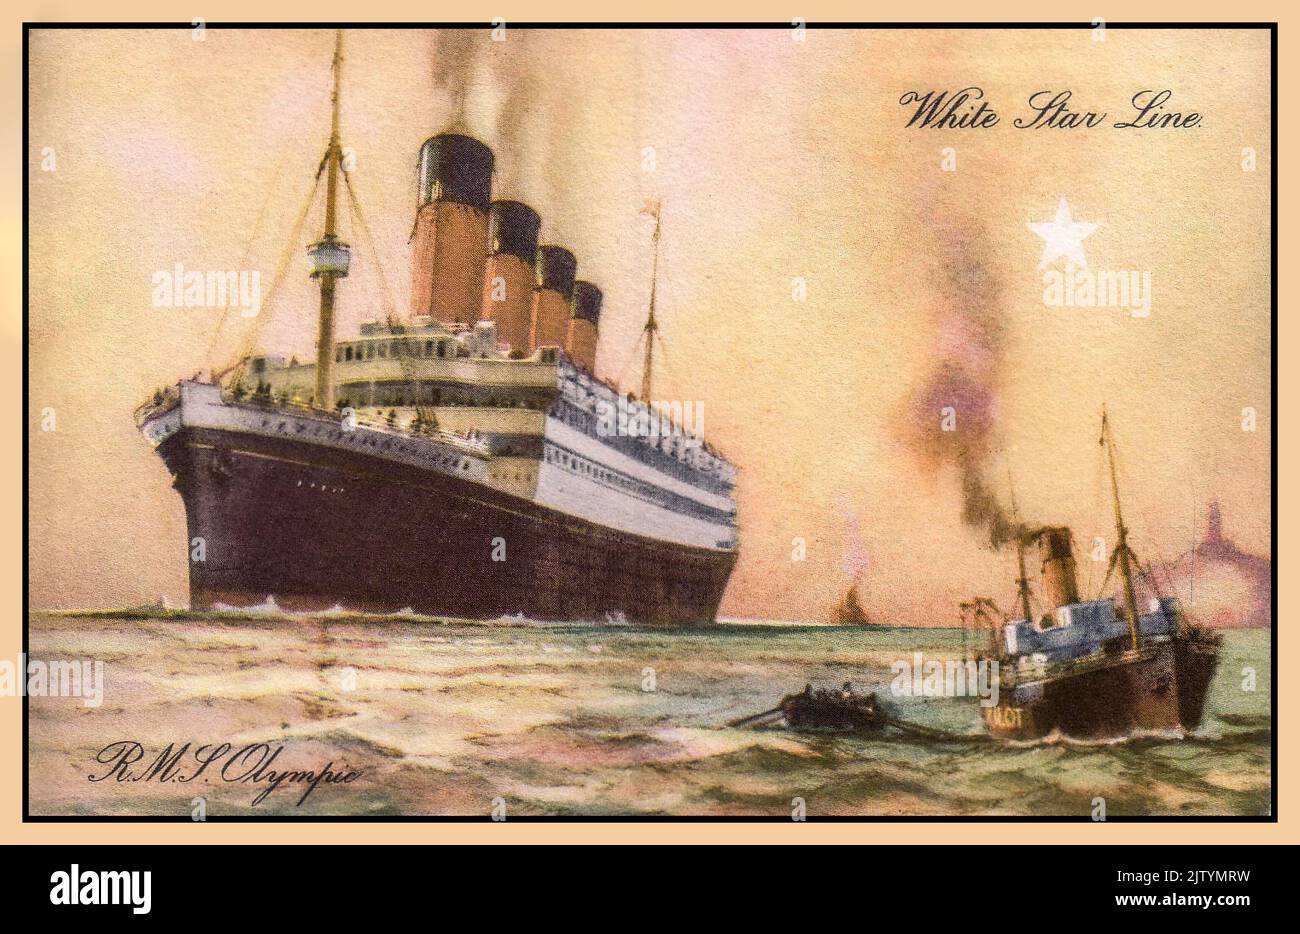 RMS Olympic - On this day, 12 May 1918, RMS Olympic, while